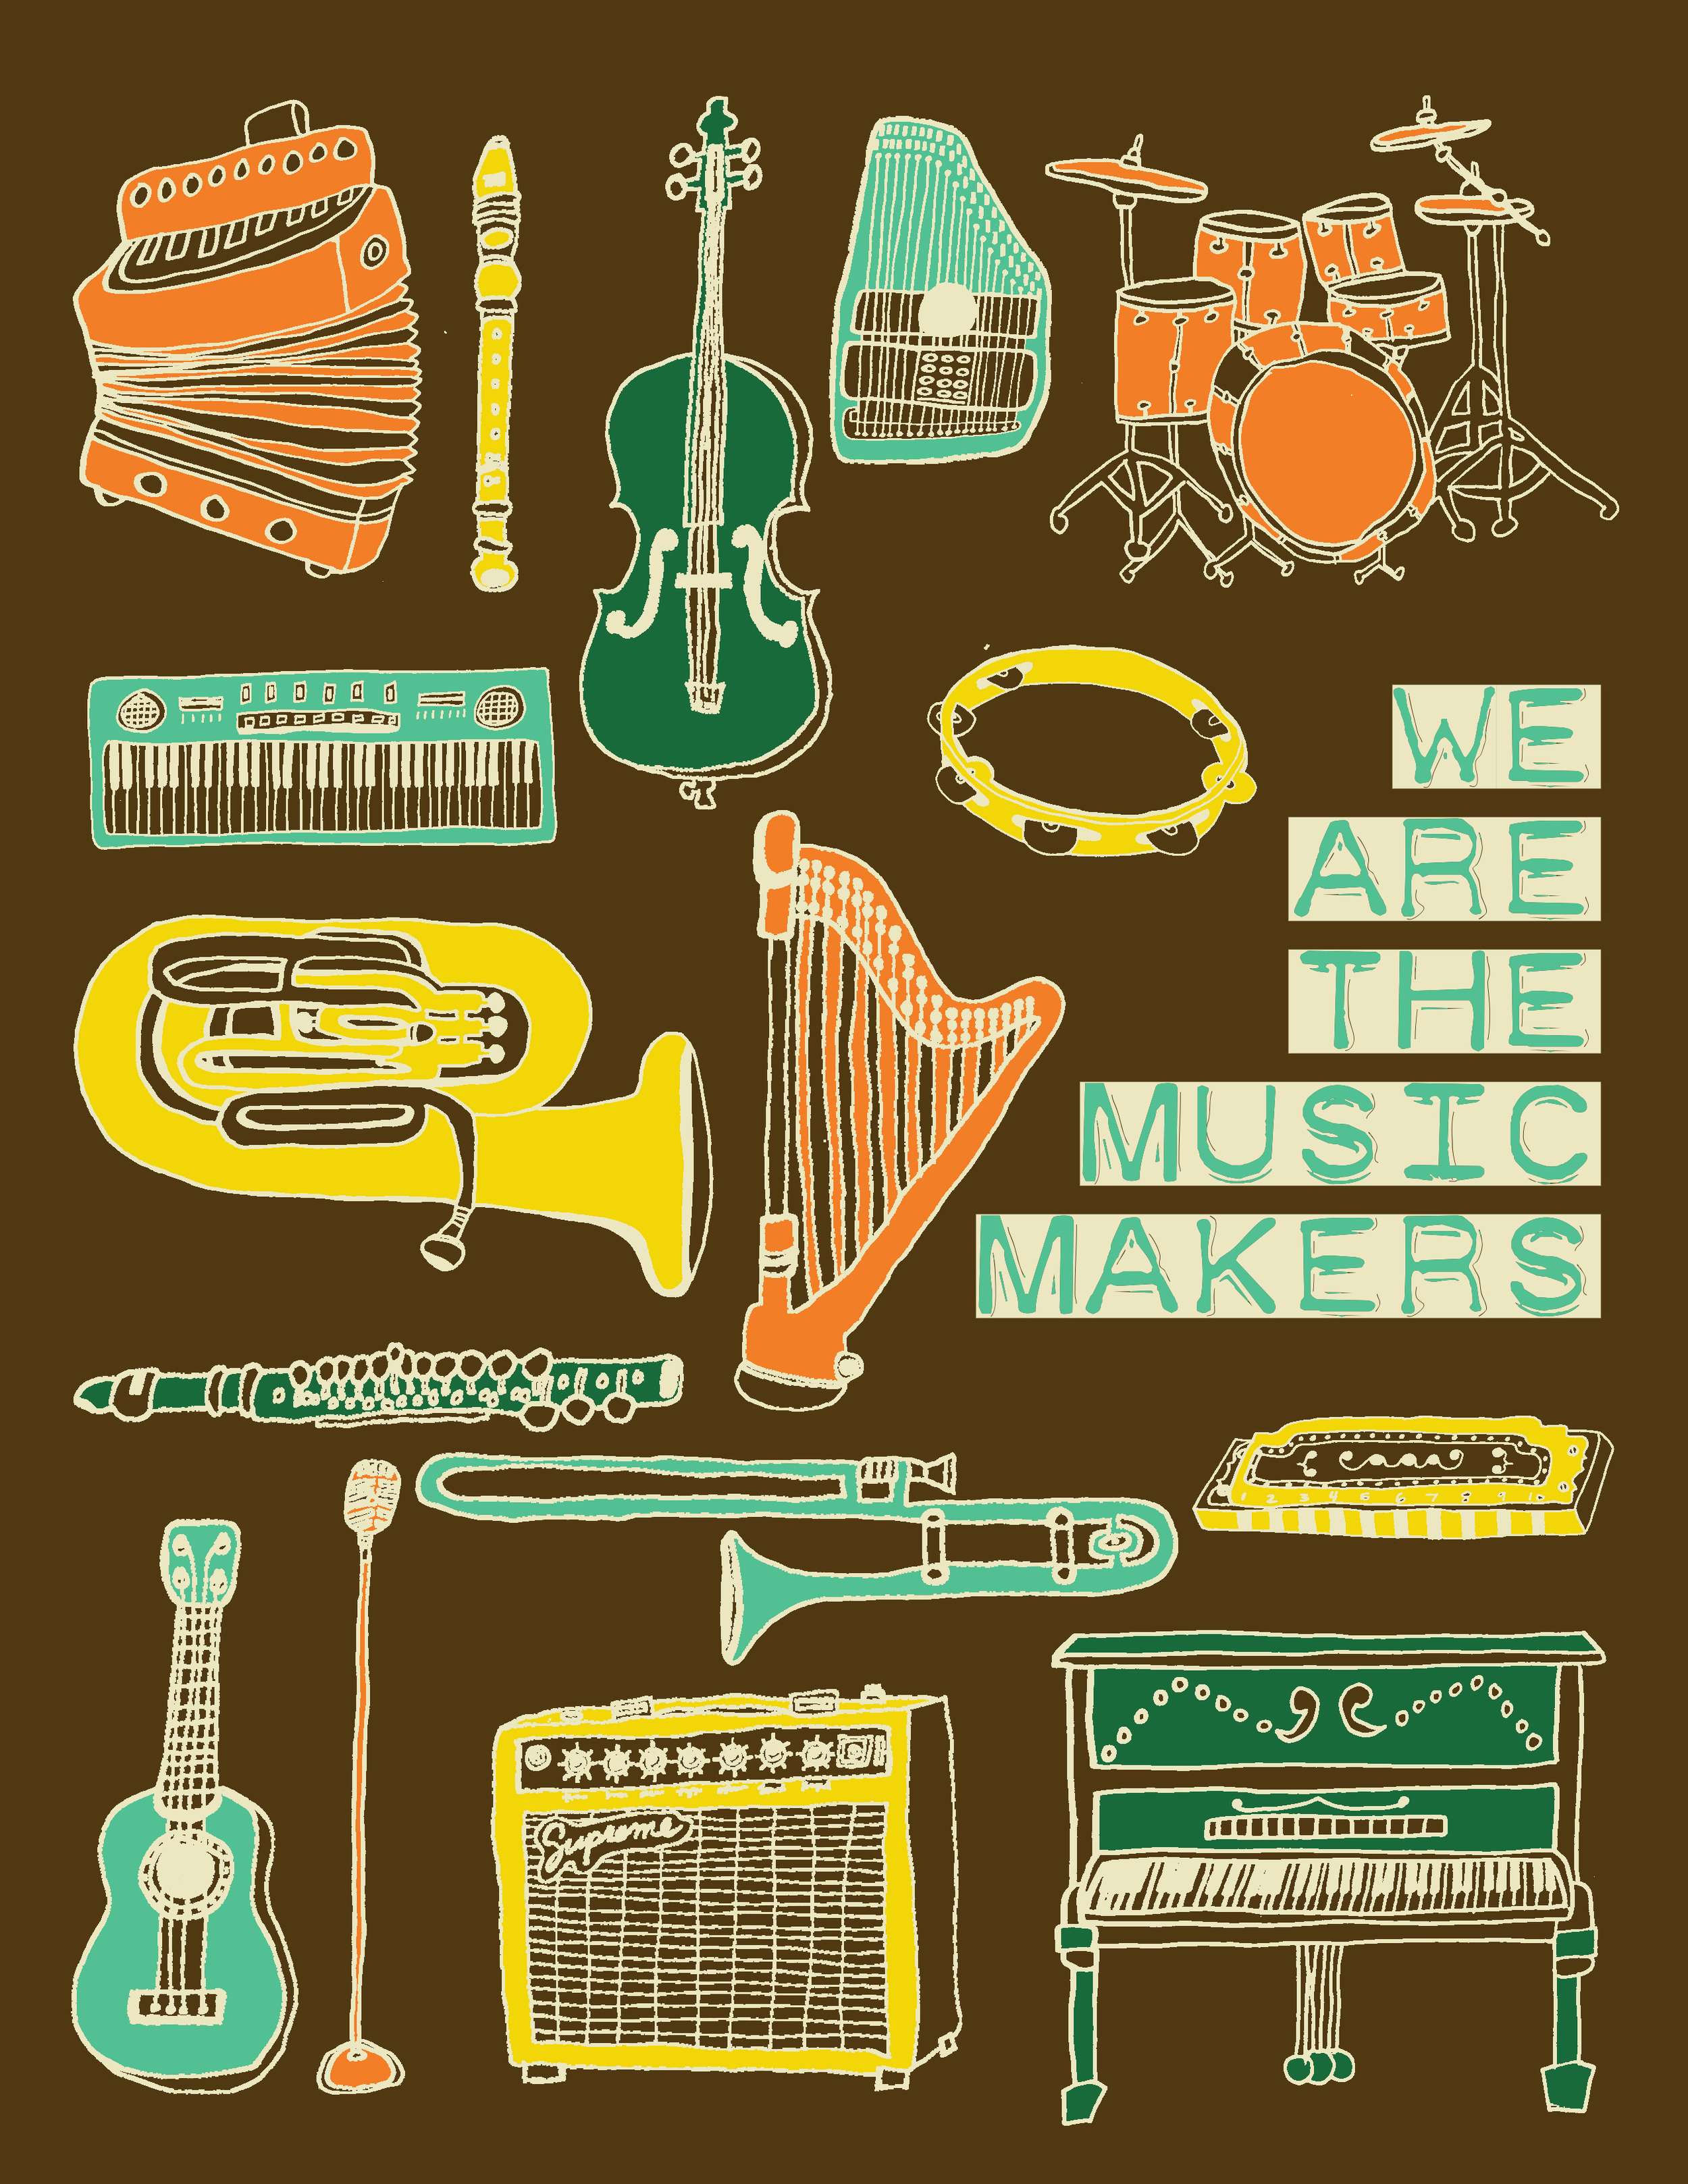 we are the music makers.jpg